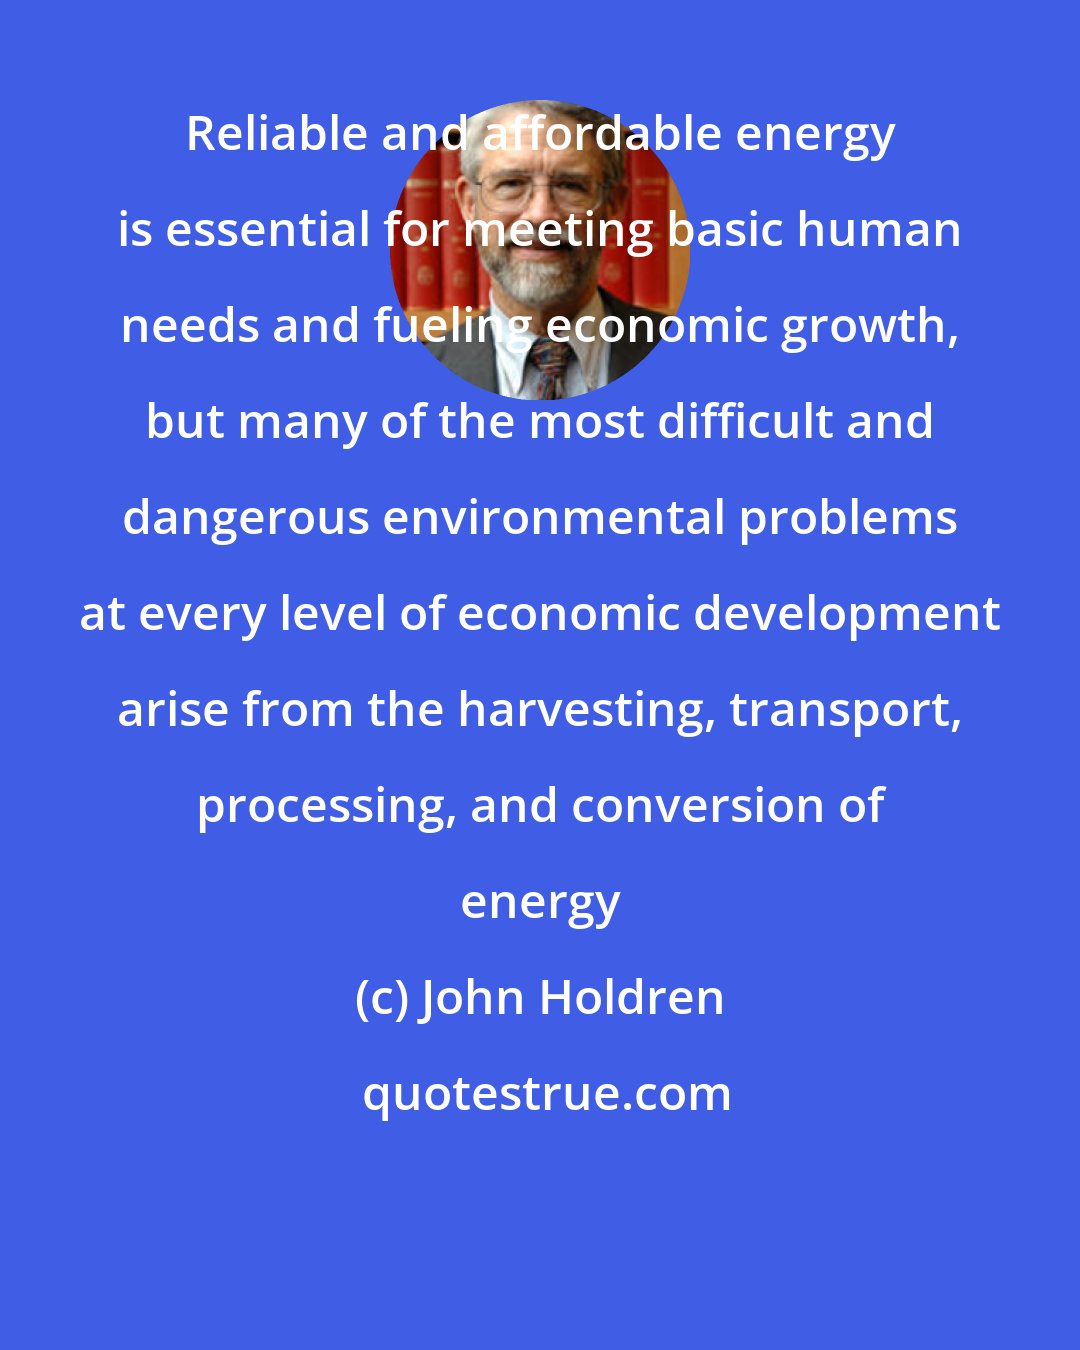 John Holdren: Reliable and affordable energy is essential for meeting basic human needs and fueling economic growth, but many of the most difficult and dangerous environmental problems at every level of economic development arise from the harvesting, transport, processing, and conversion of energy